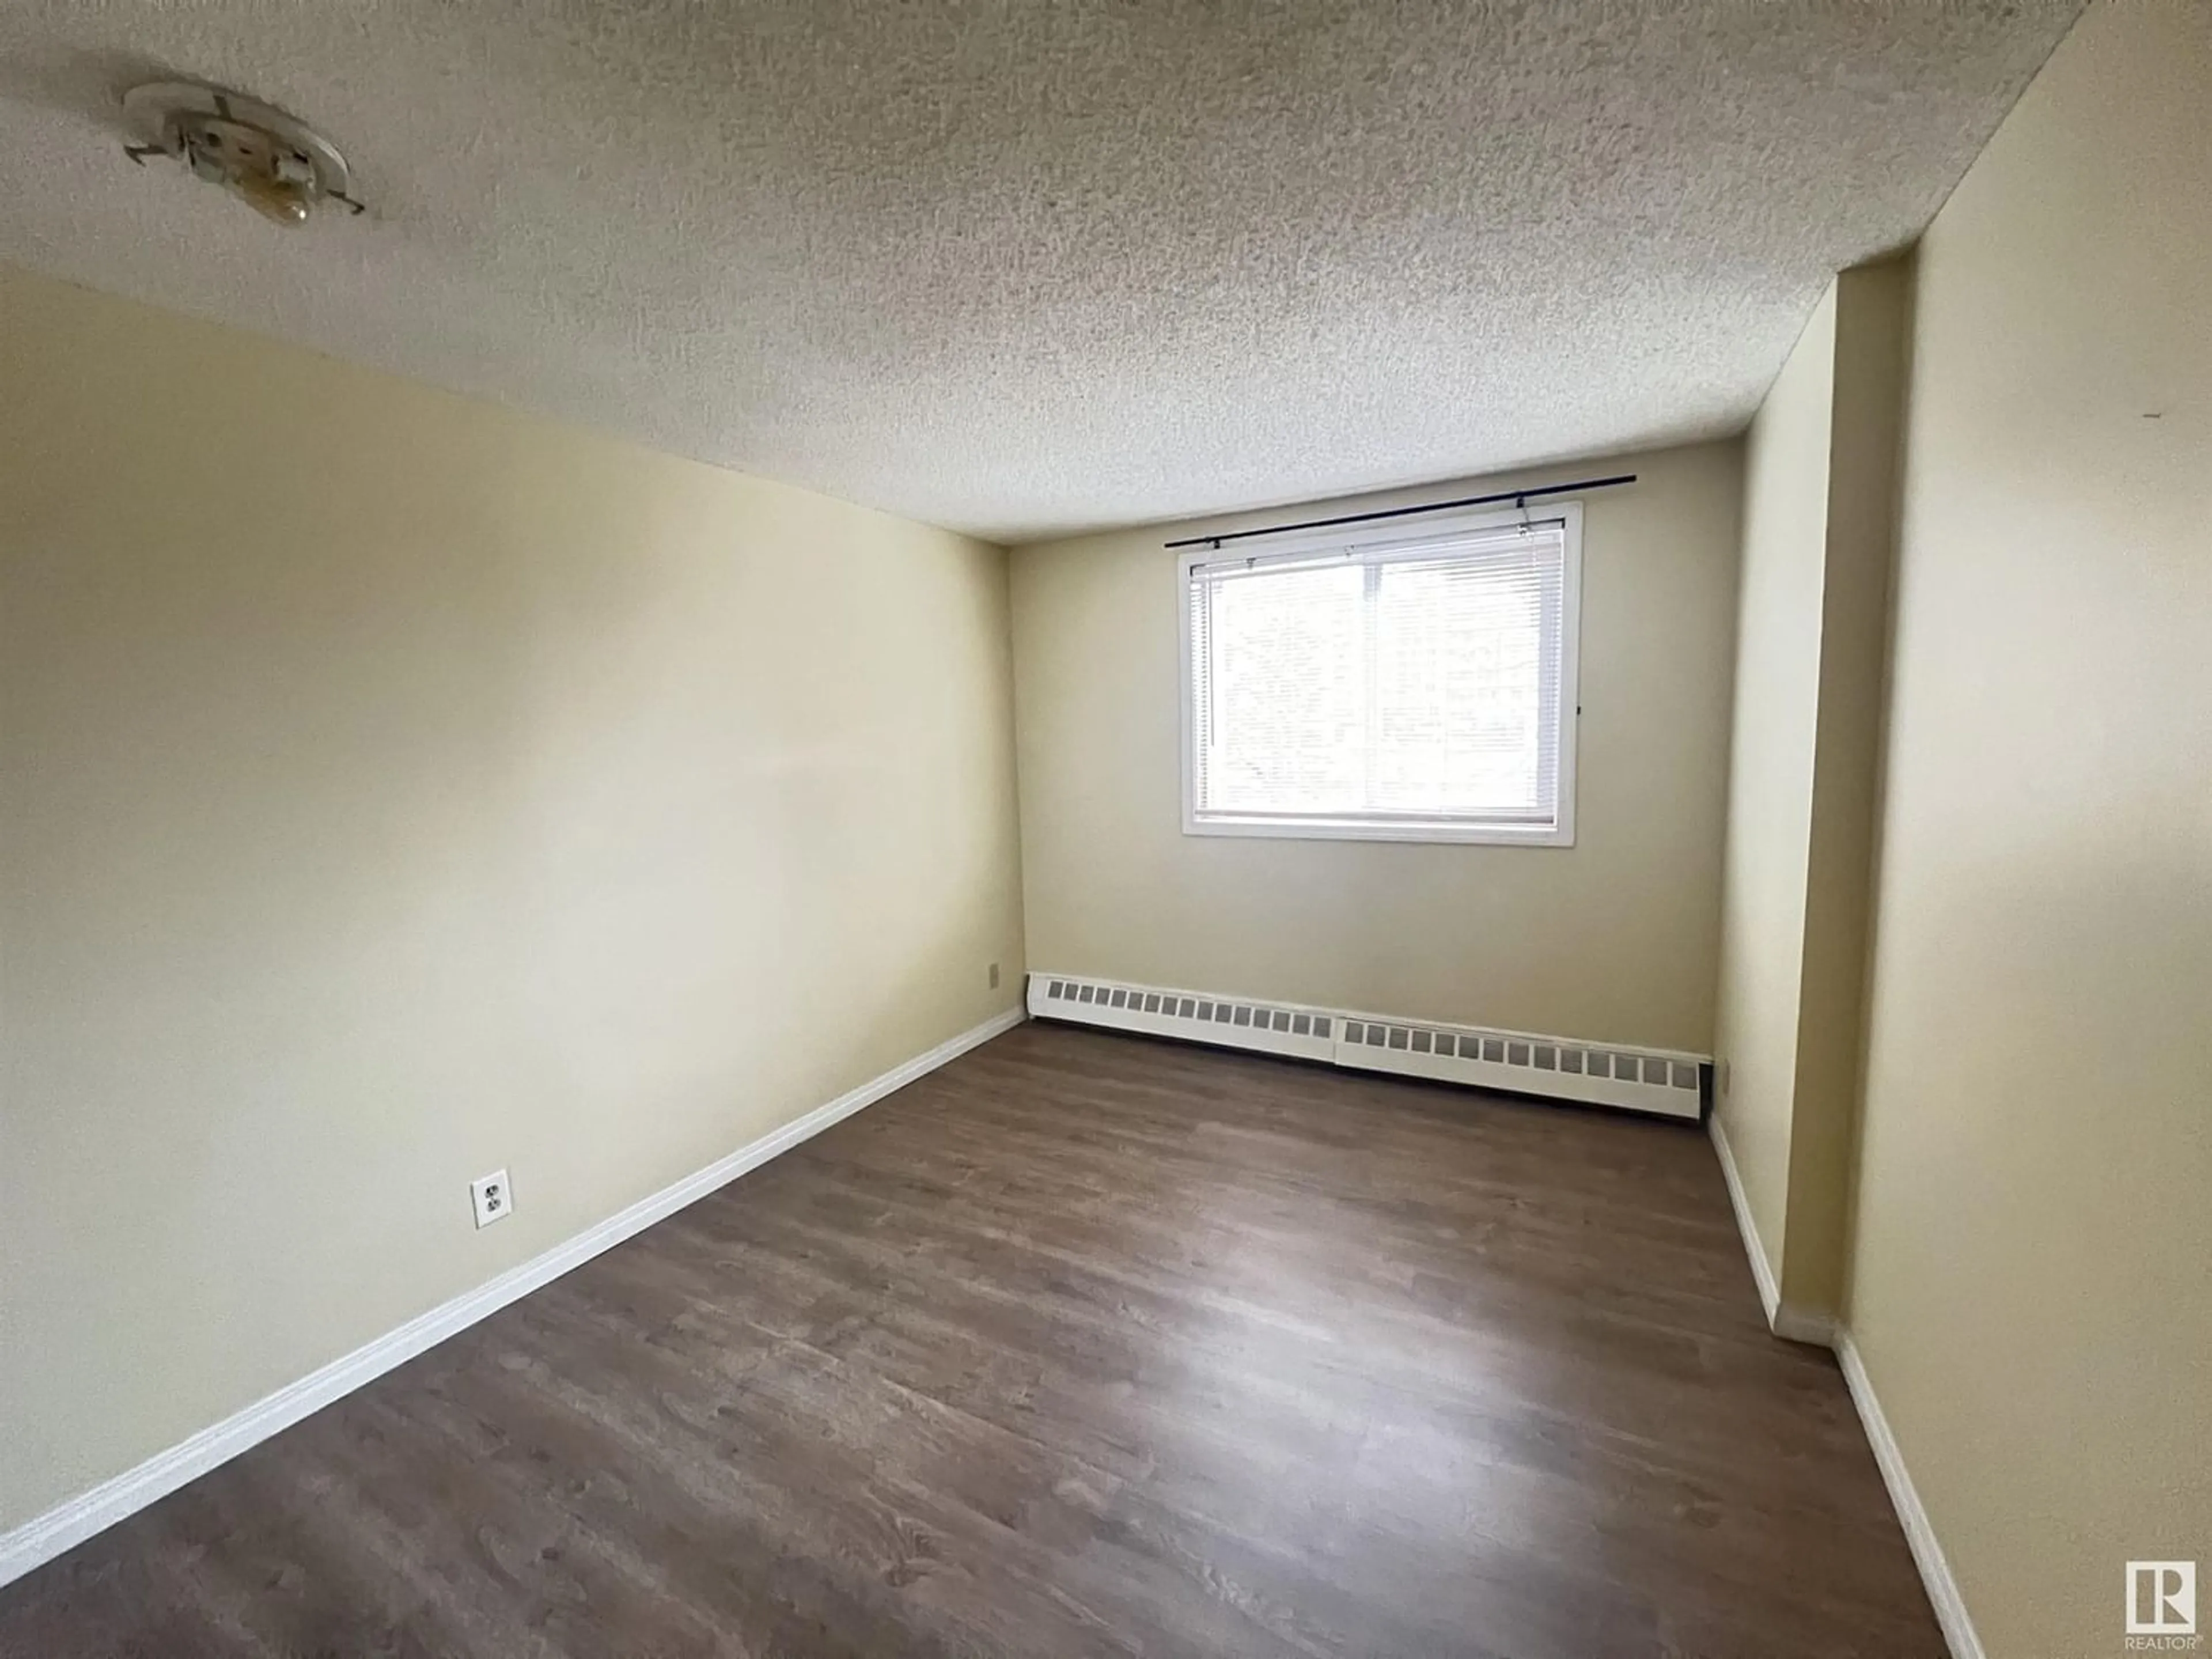 A pic of a room for #305 10135 120 ST NW, Edmonton Alberta T5K2A1